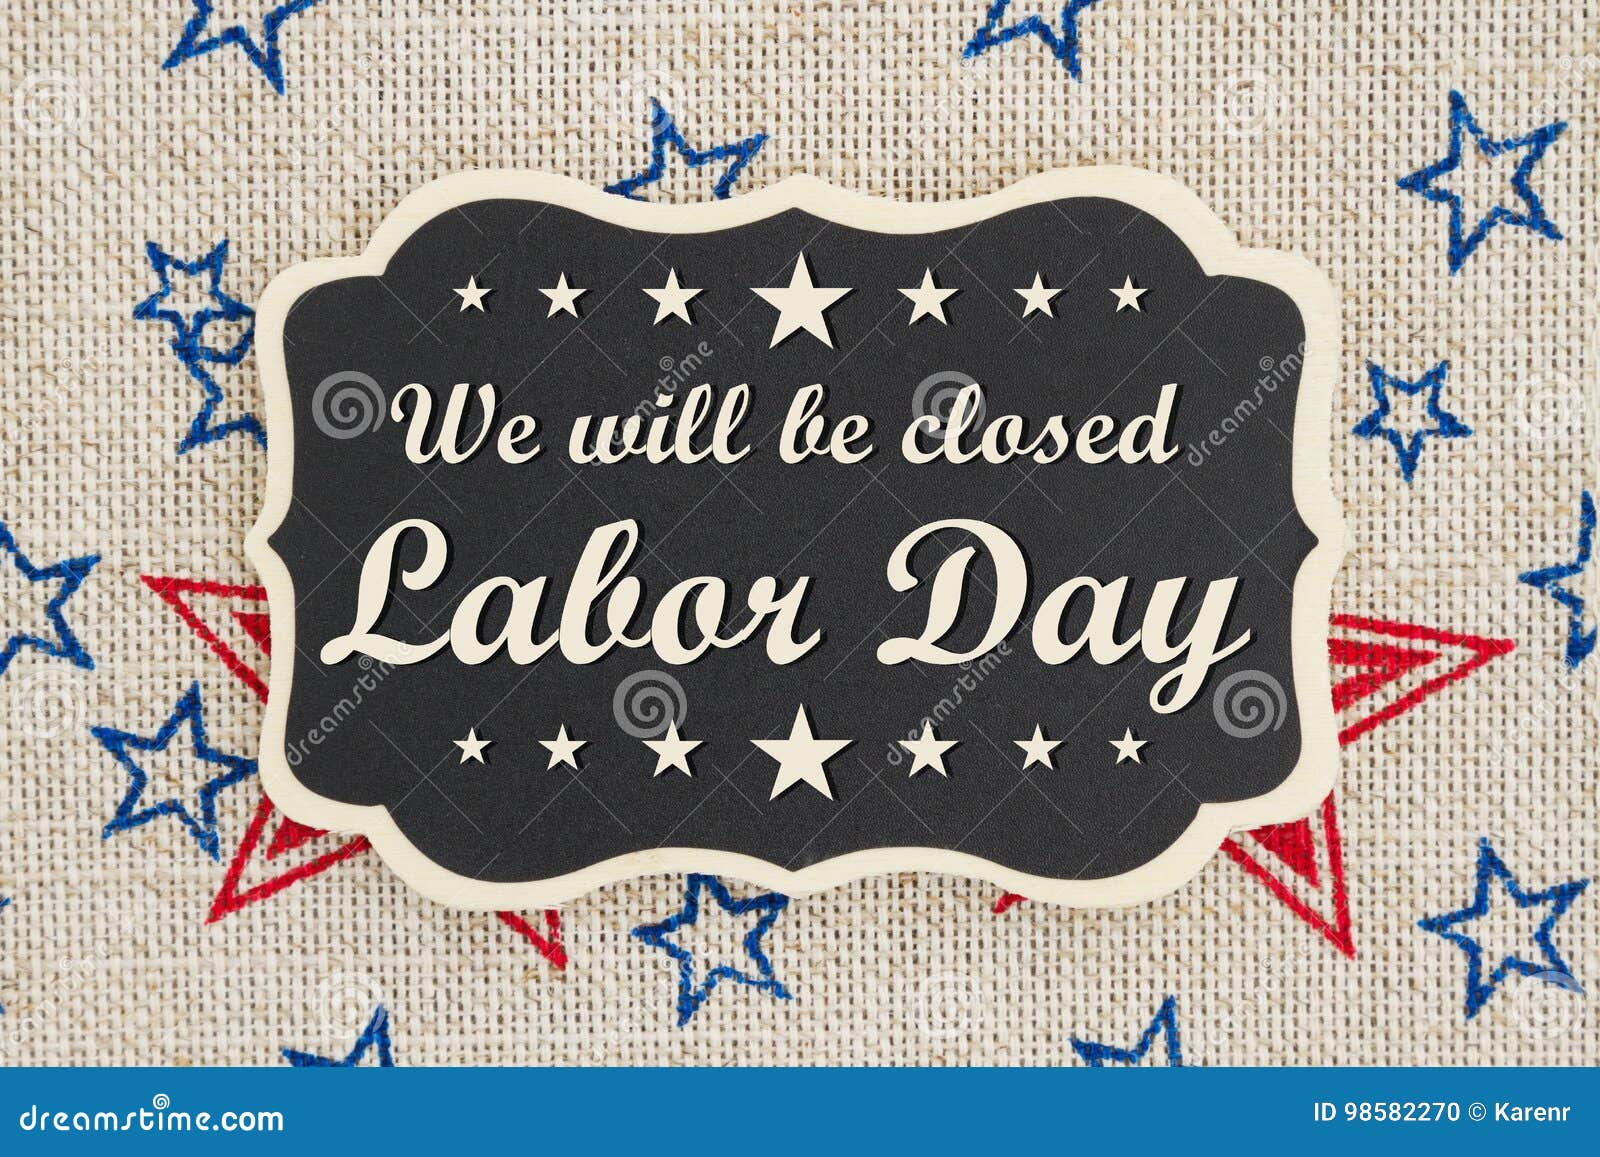 we will be closed labor day message